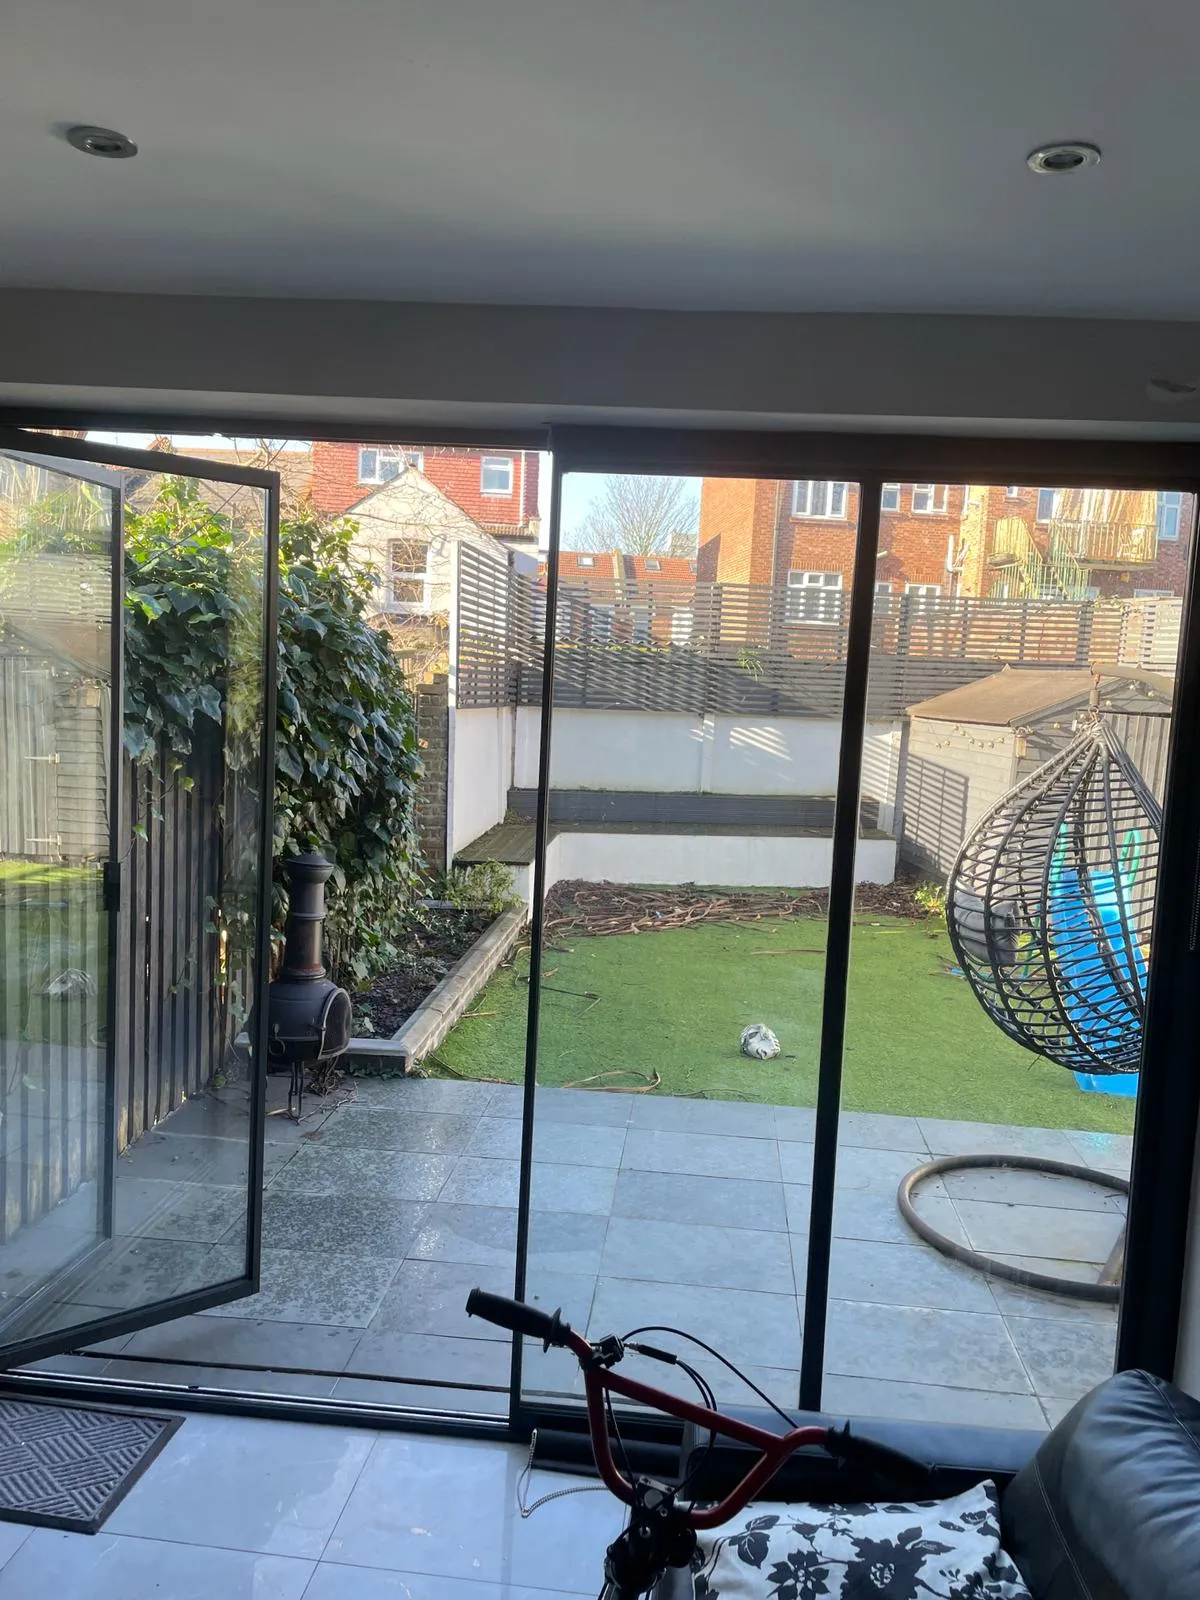 Minimal glass doors installed overlooking a patio and garden in the UK. It is partially open.